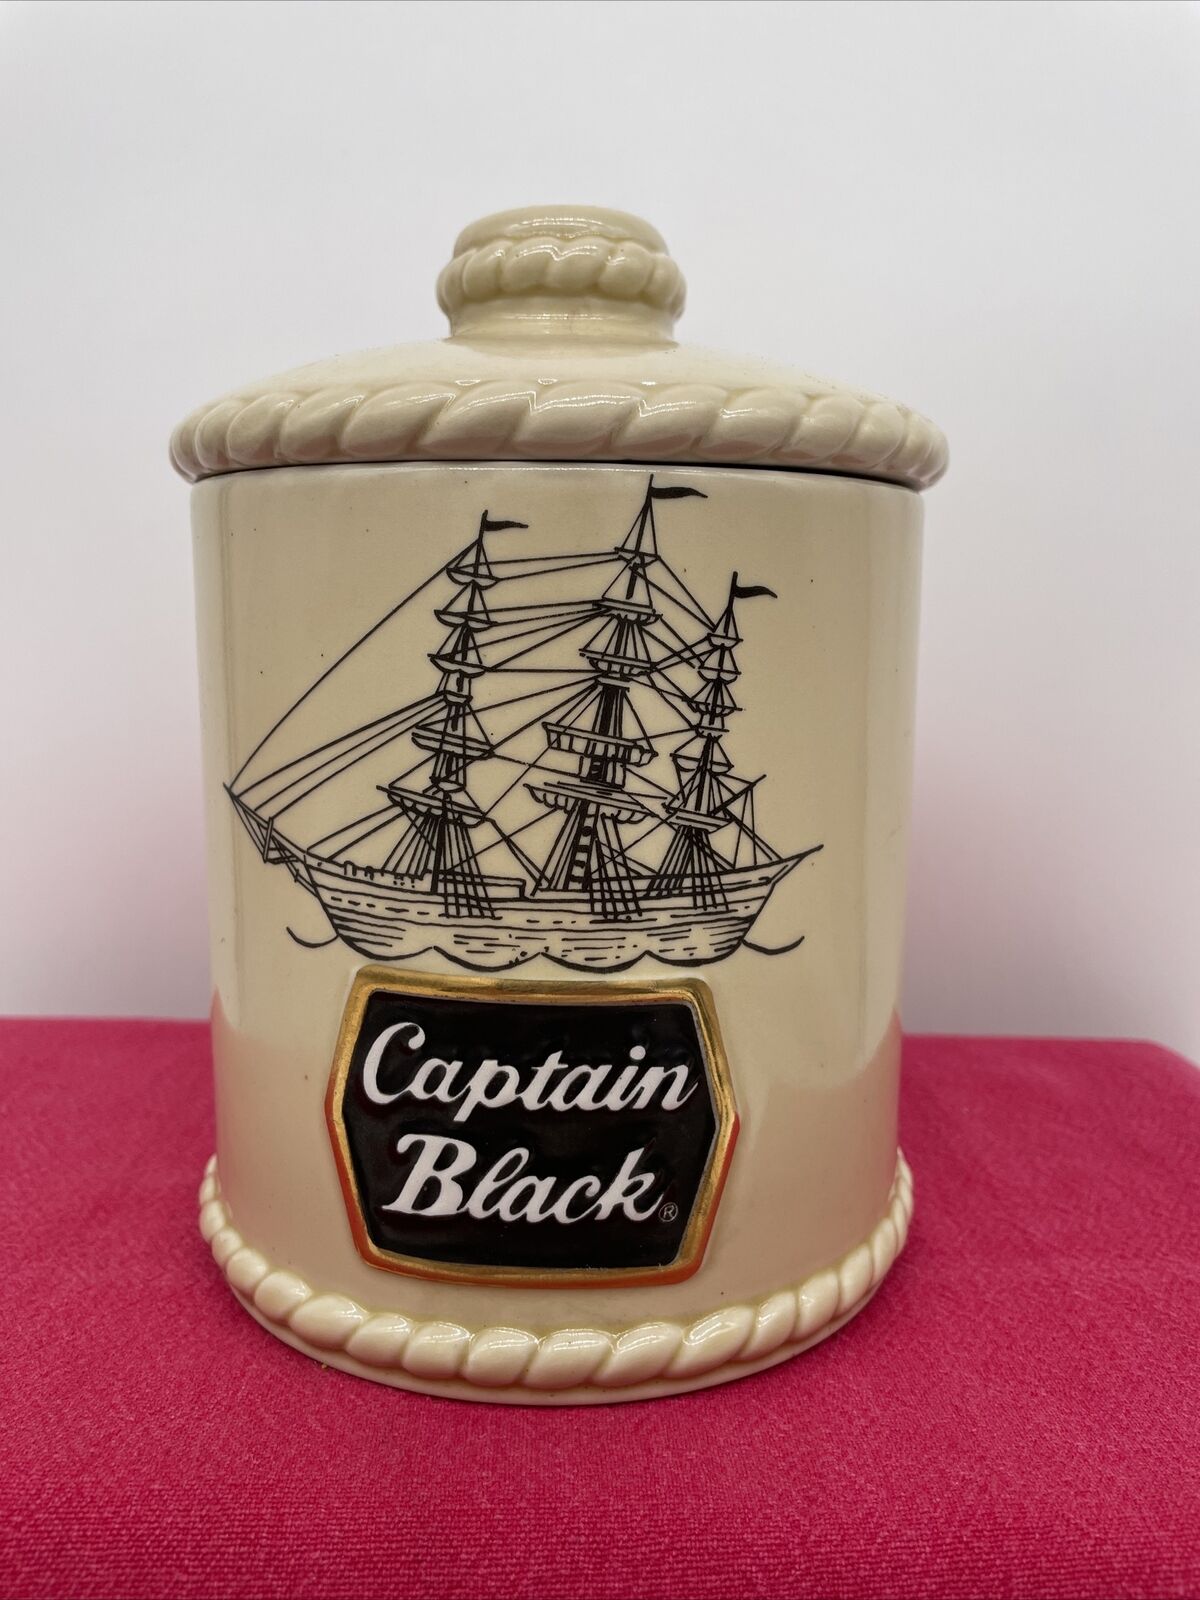 Captain Black Special Edition Tobacco Canister Humidor Ceramic Lidded Jar Brazil